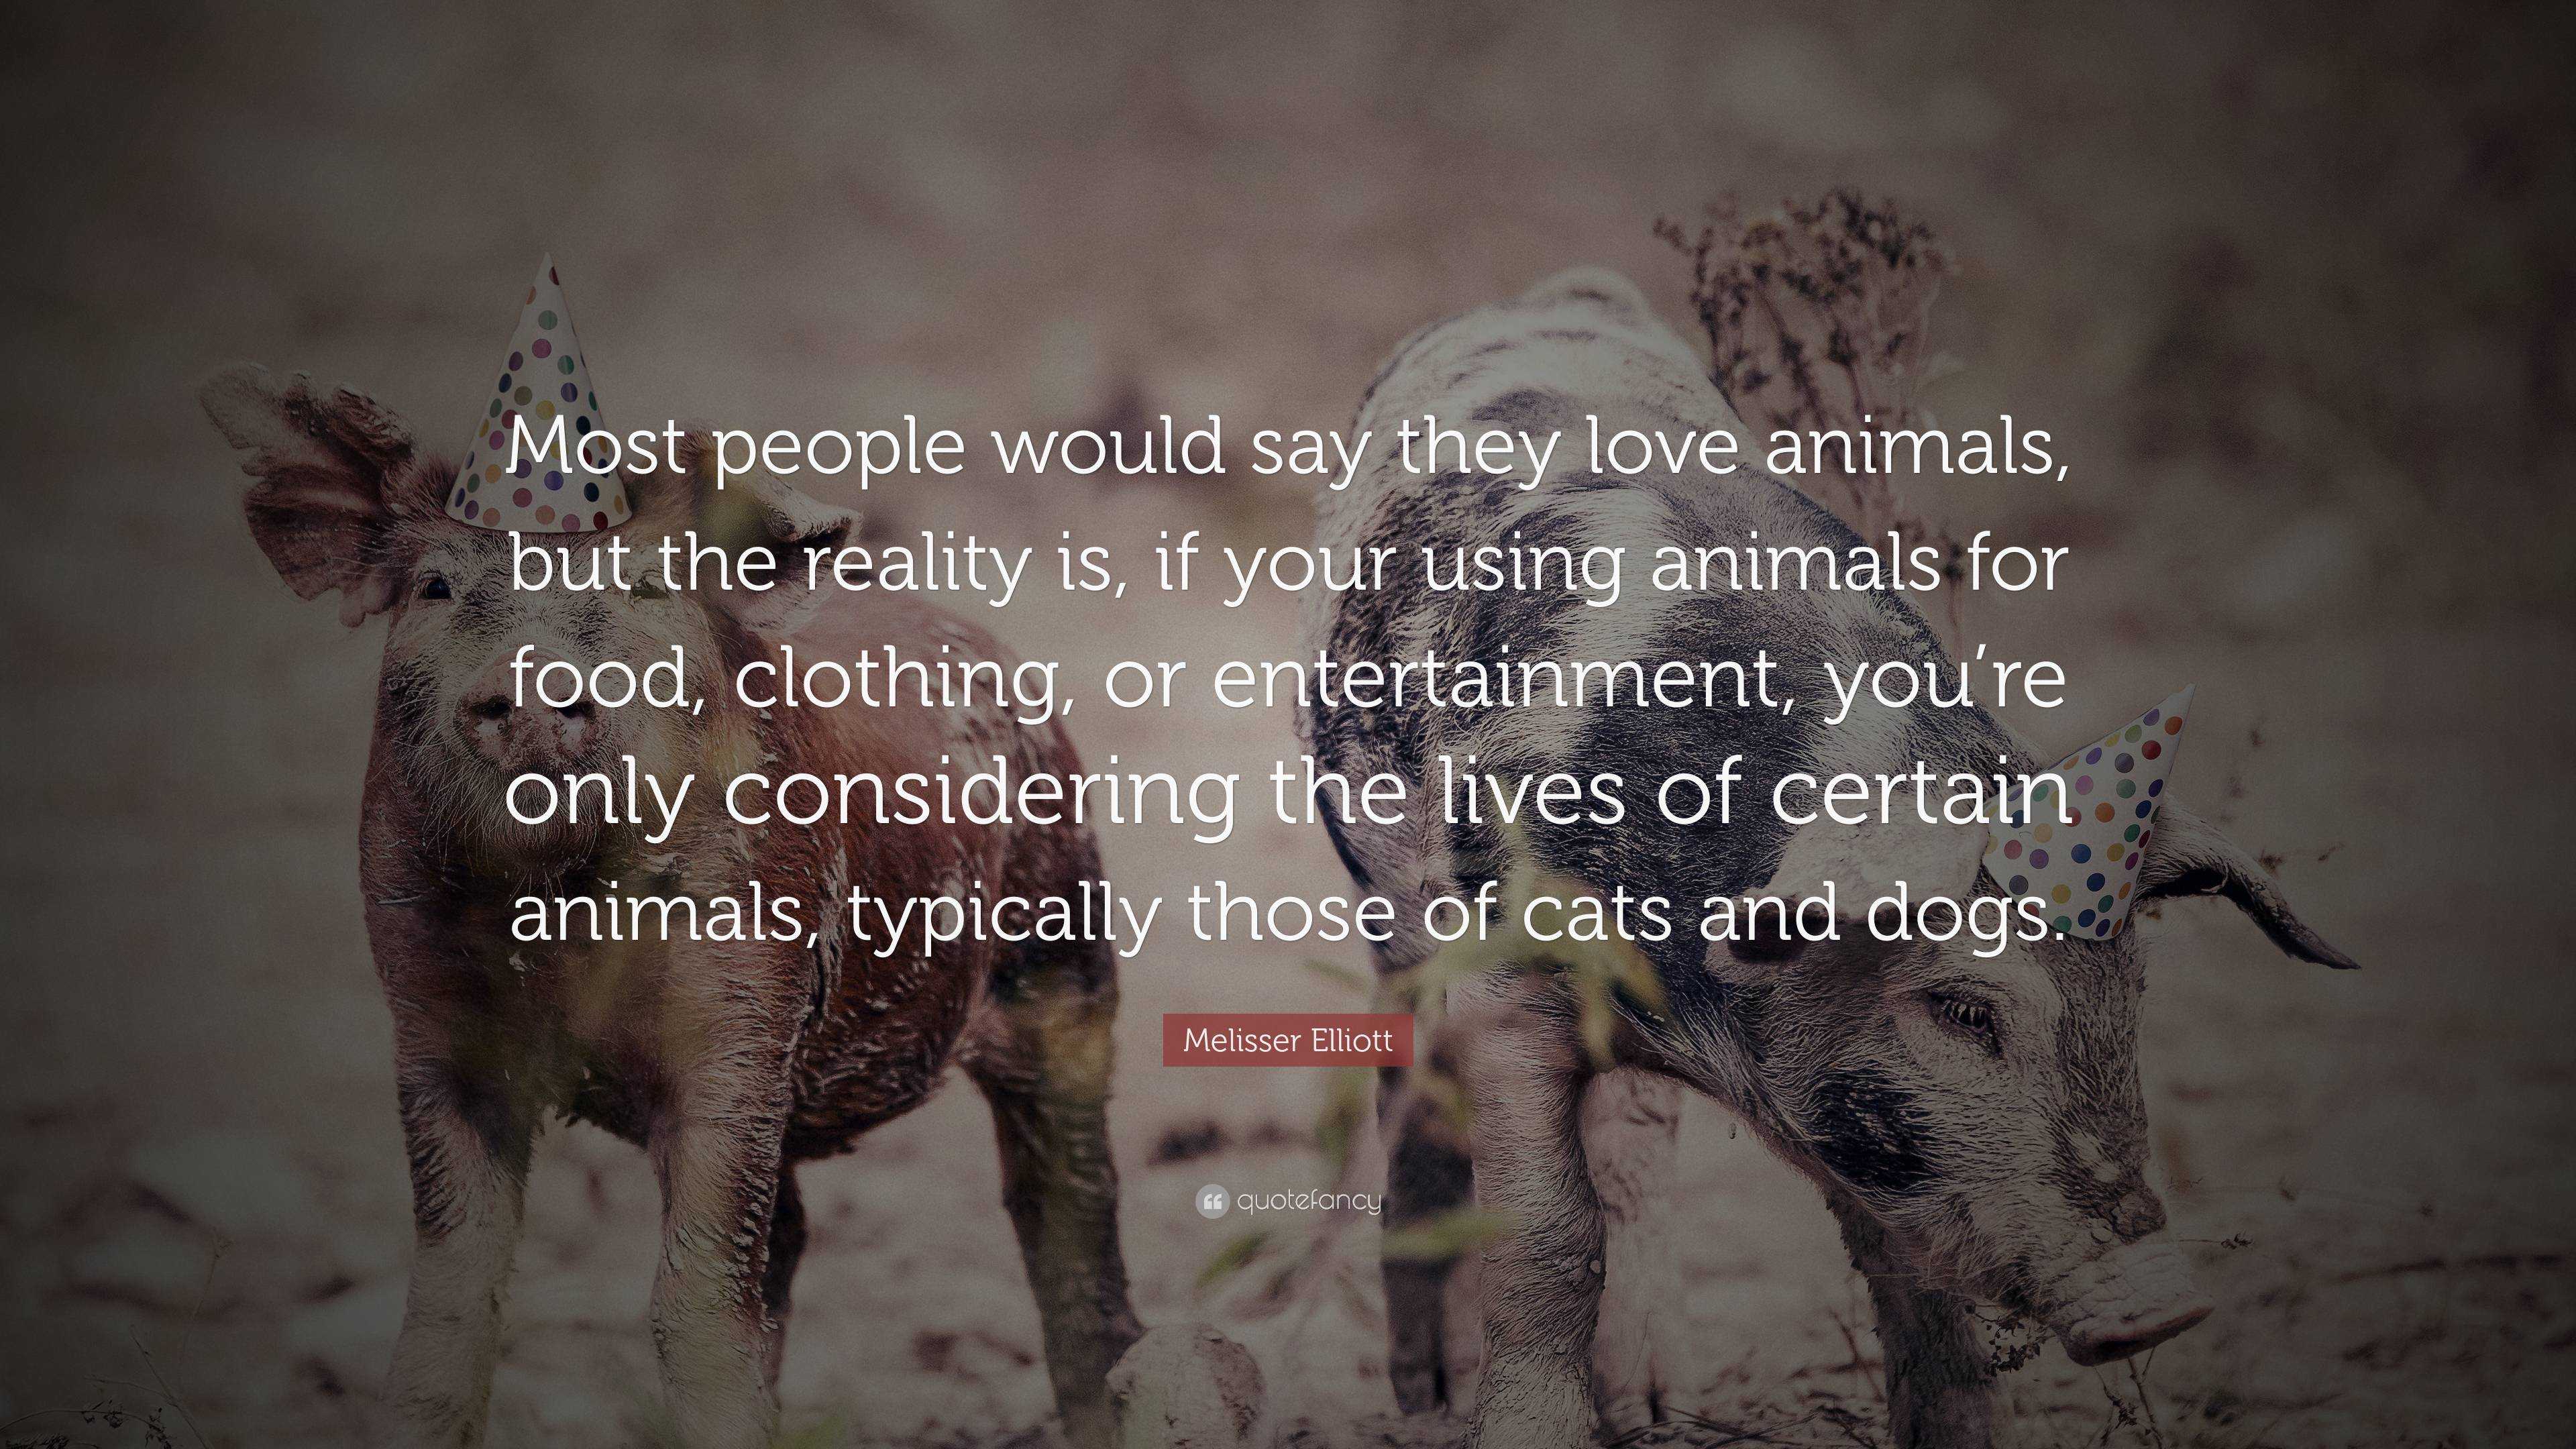 Melisser Elliott Quote: “Most people would say they love animals, but the  reality is, if your using animals for food, clothing, or entertainment,...”